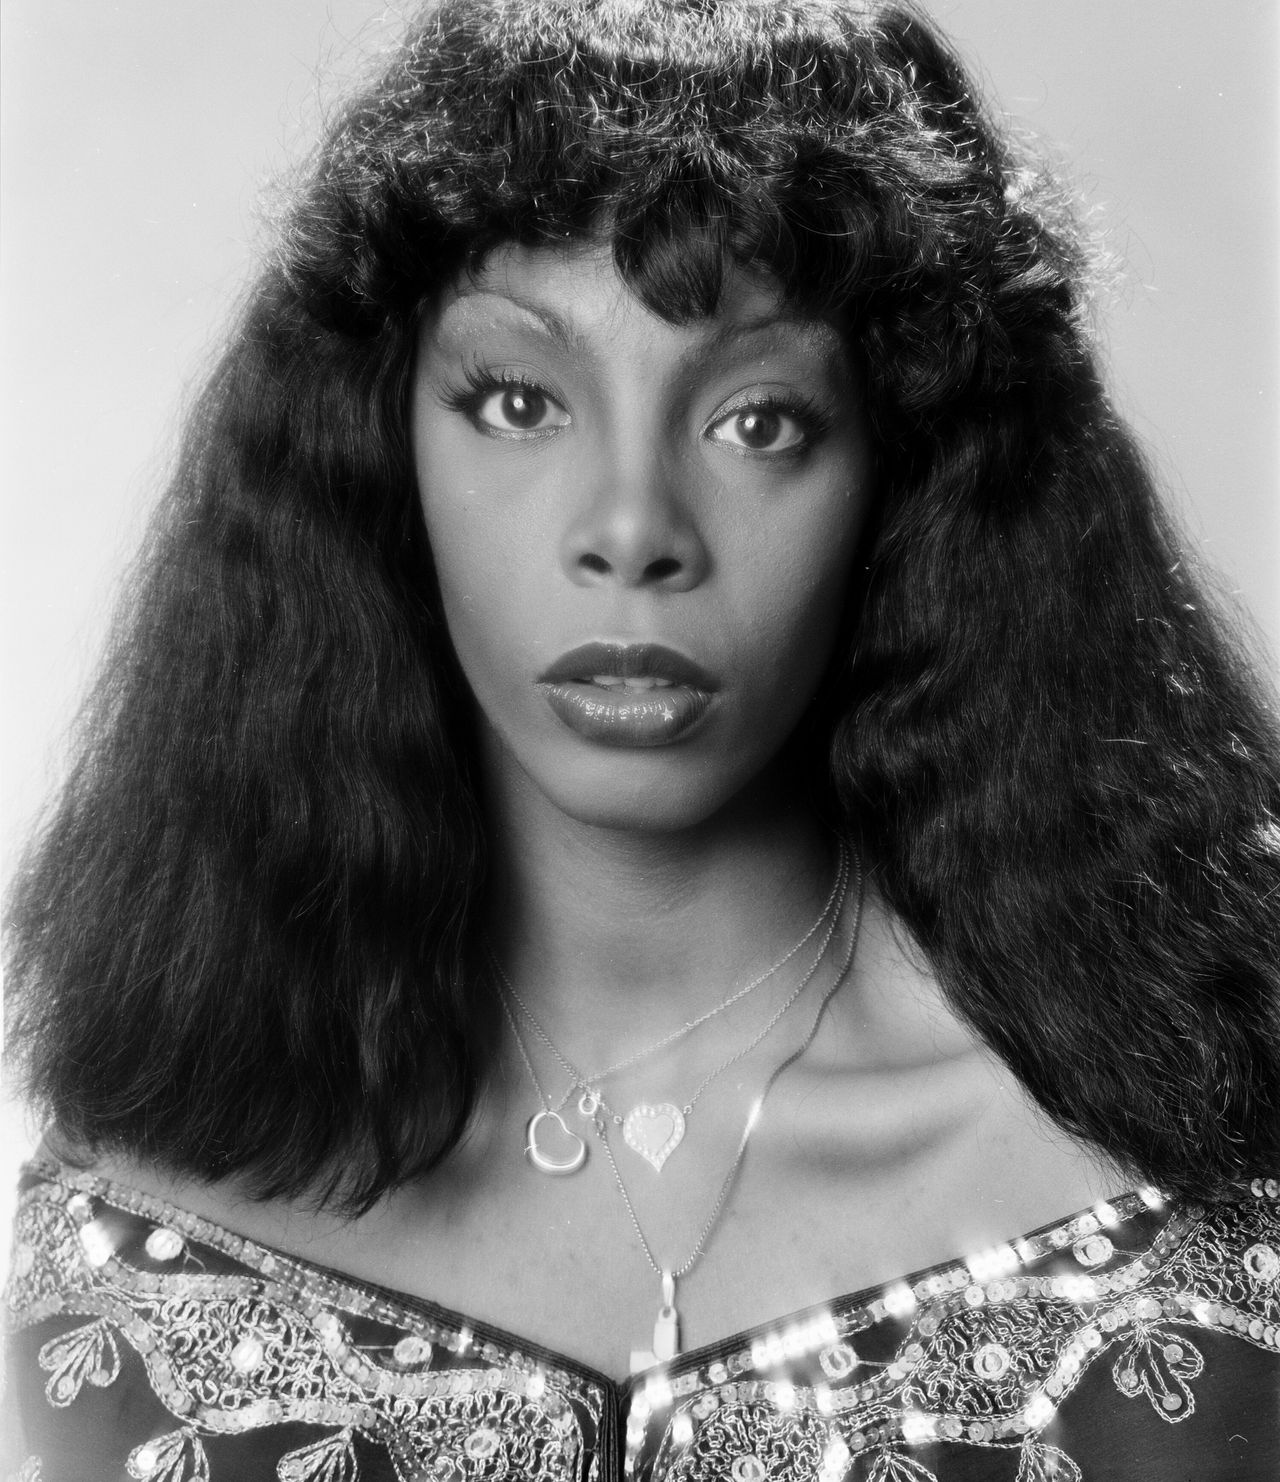 Donna Summer photographed in 1976 just after her hit 'Love to Love You Baby' became a platinum single. 